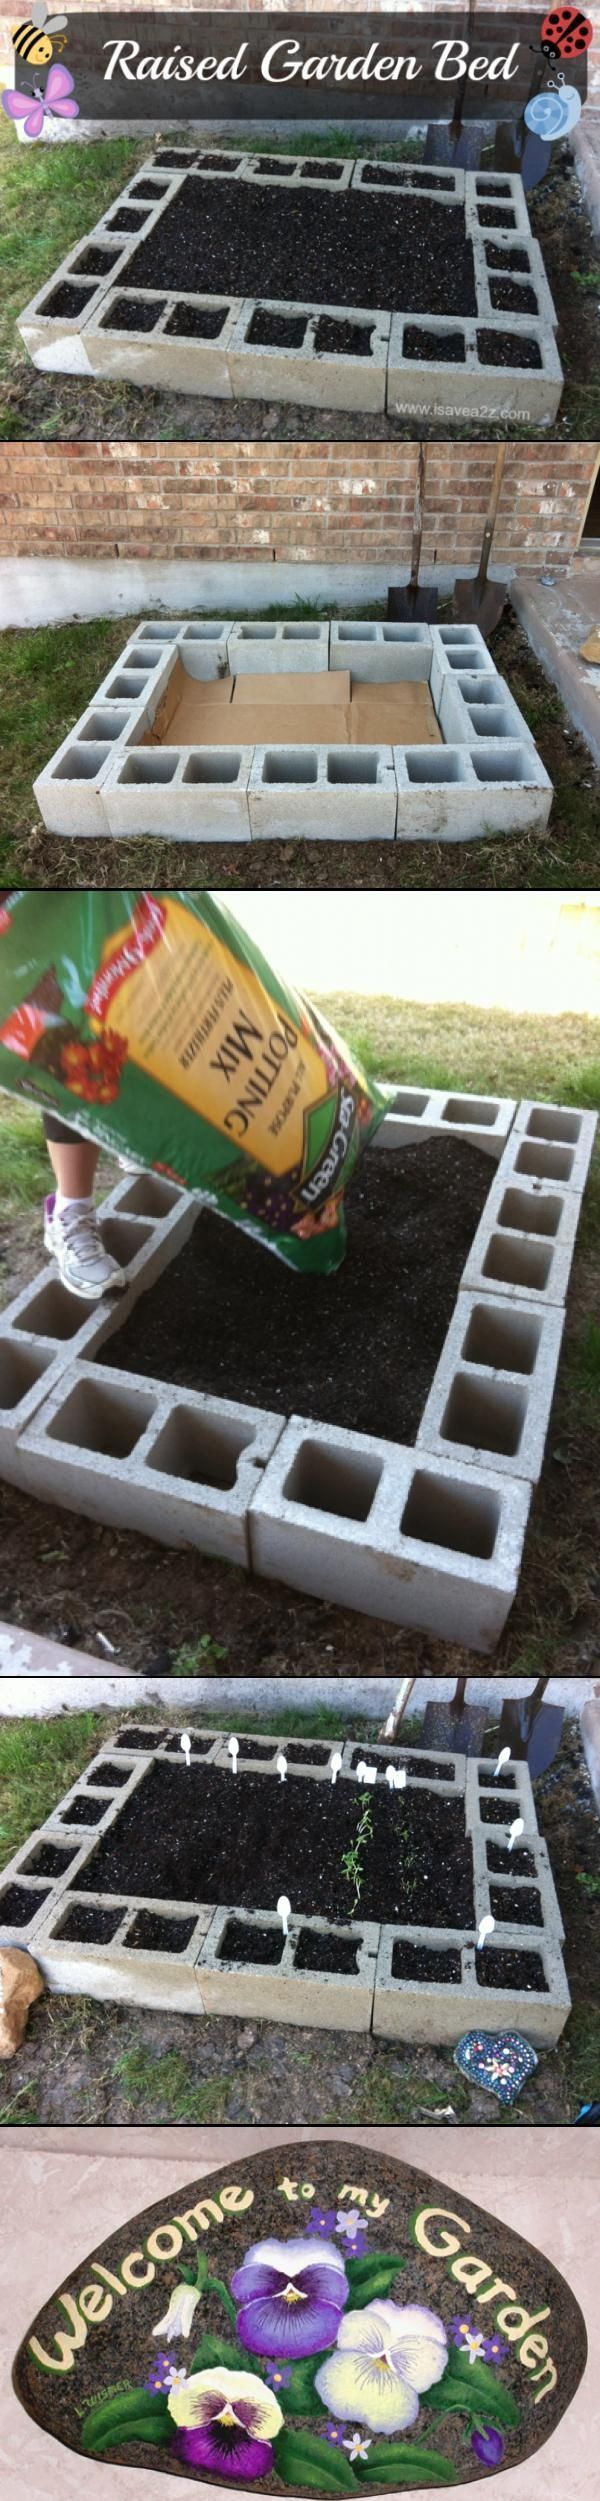 SO COOL! DIY Raised Garden Bed made out of cinder blocks! So EASY!!! – interiors-designe…